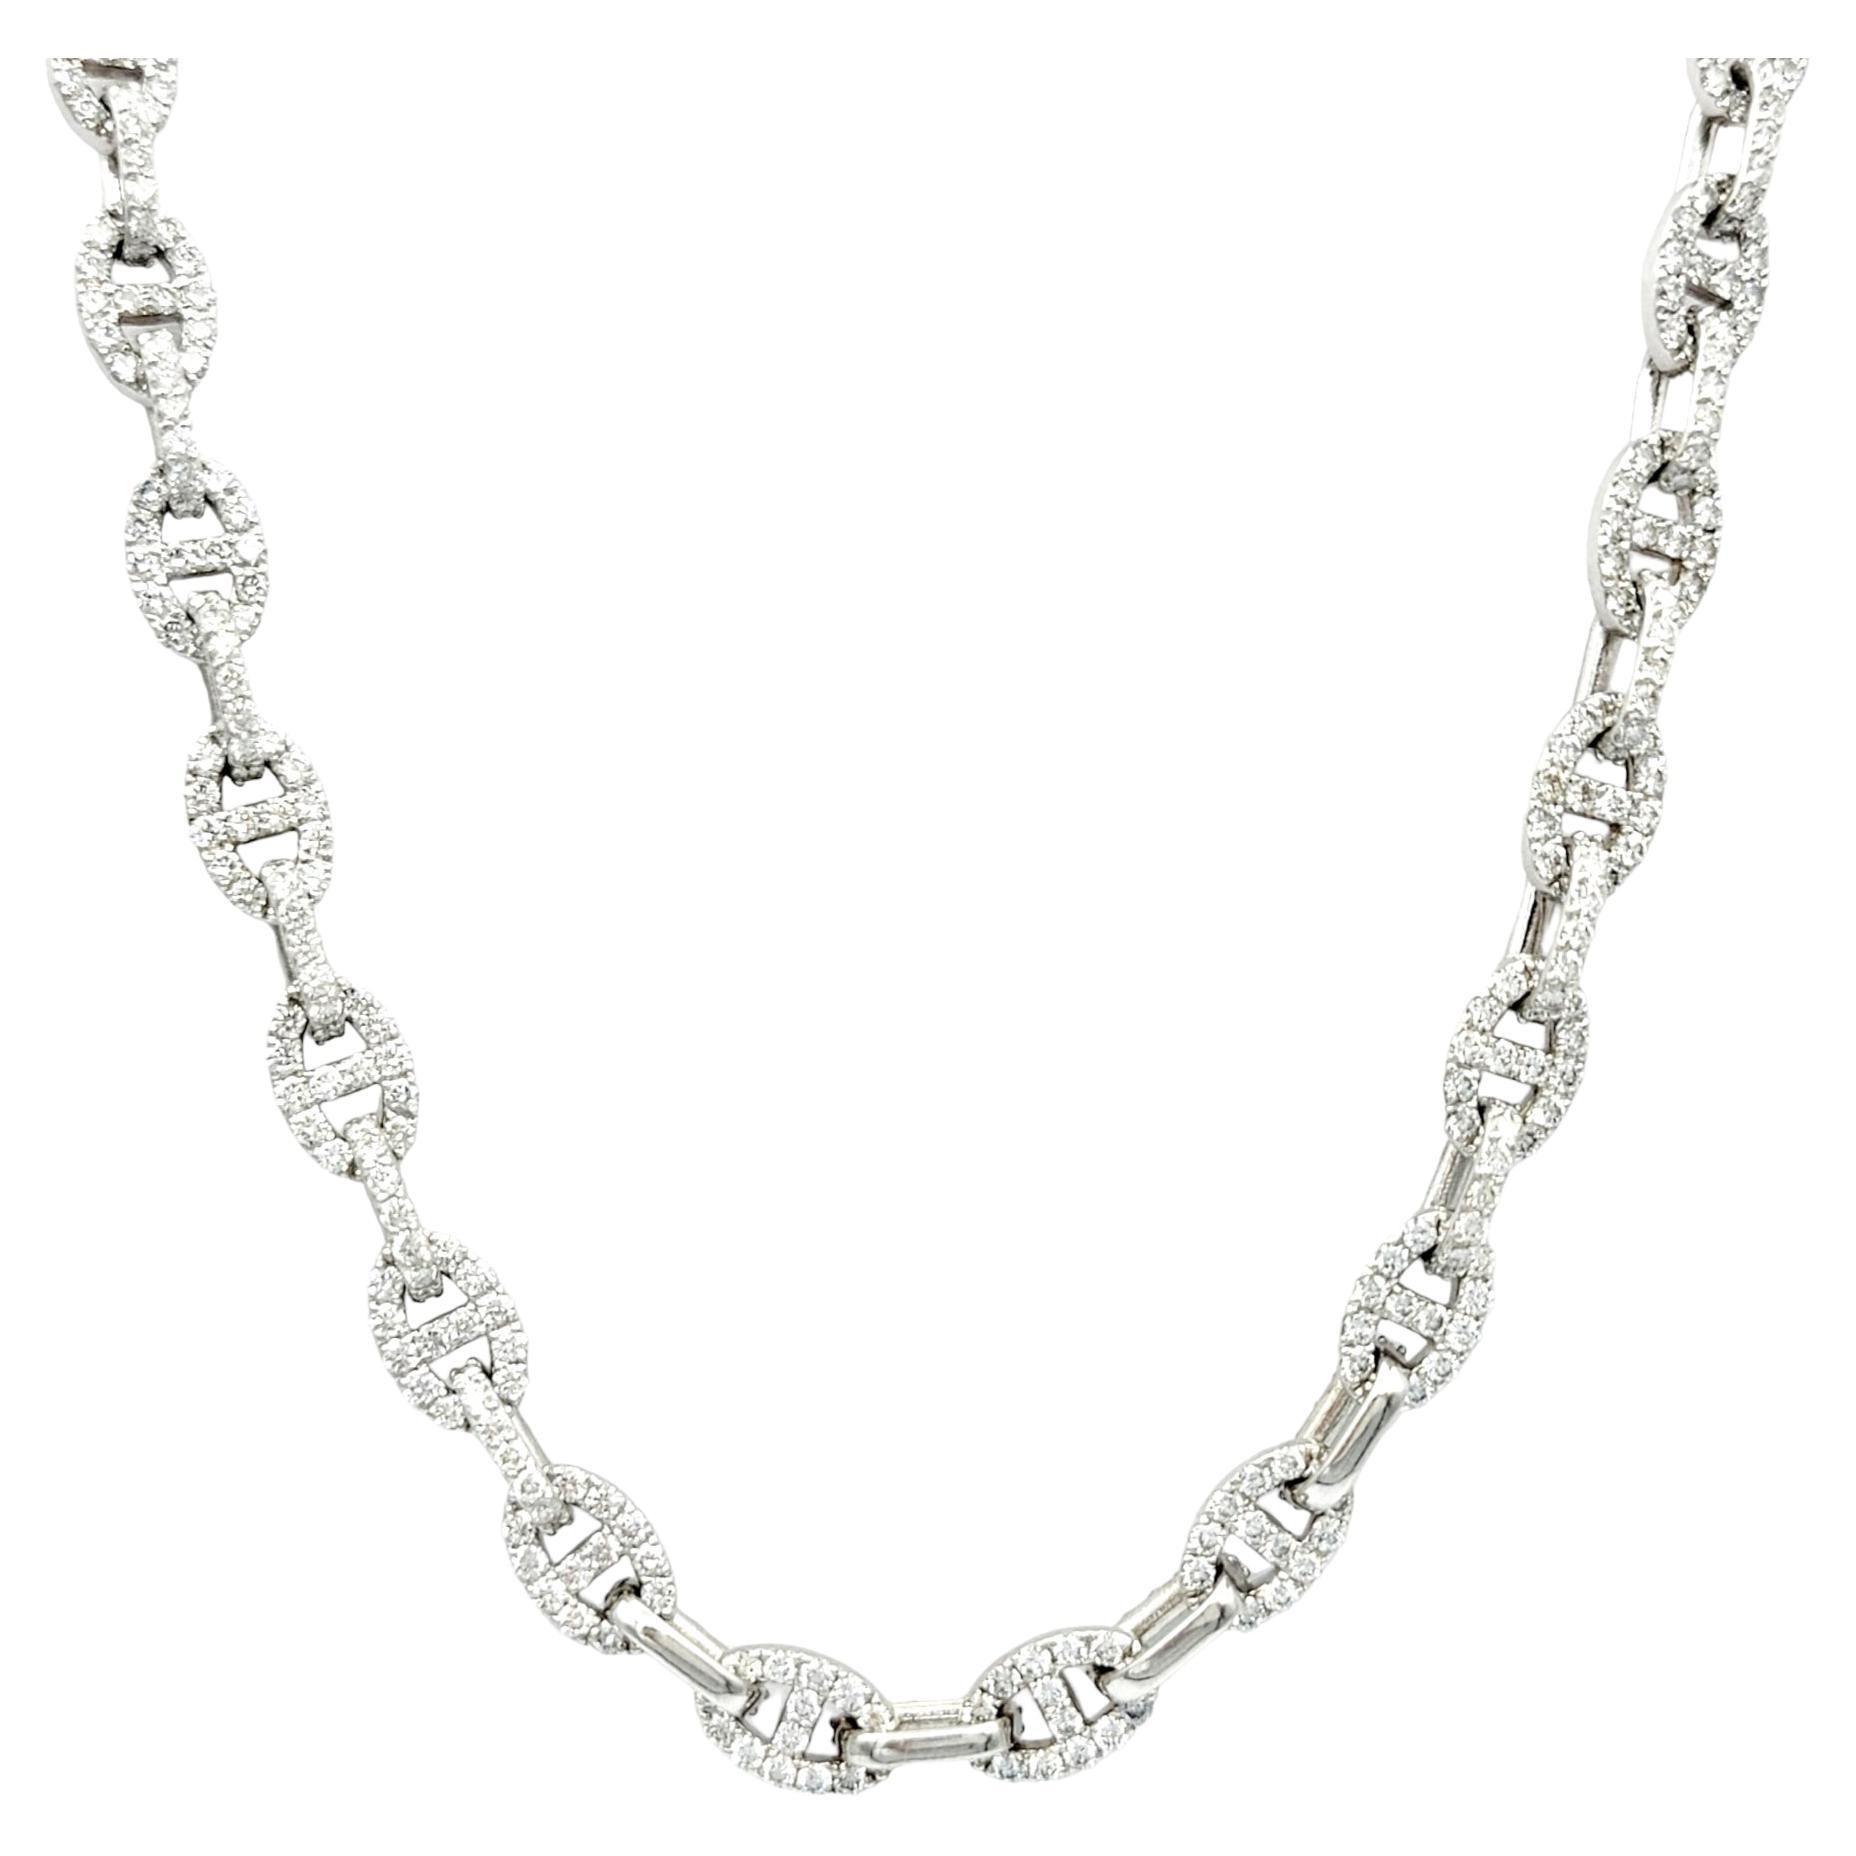 This luxurious oval chunky link necklace, a masterful creation set in the enduring beauty of 18-karat white gold, is an absolute  marvel. The bold and distinctive design of the elongated links elevates the necklace, creating a captivating canvas for